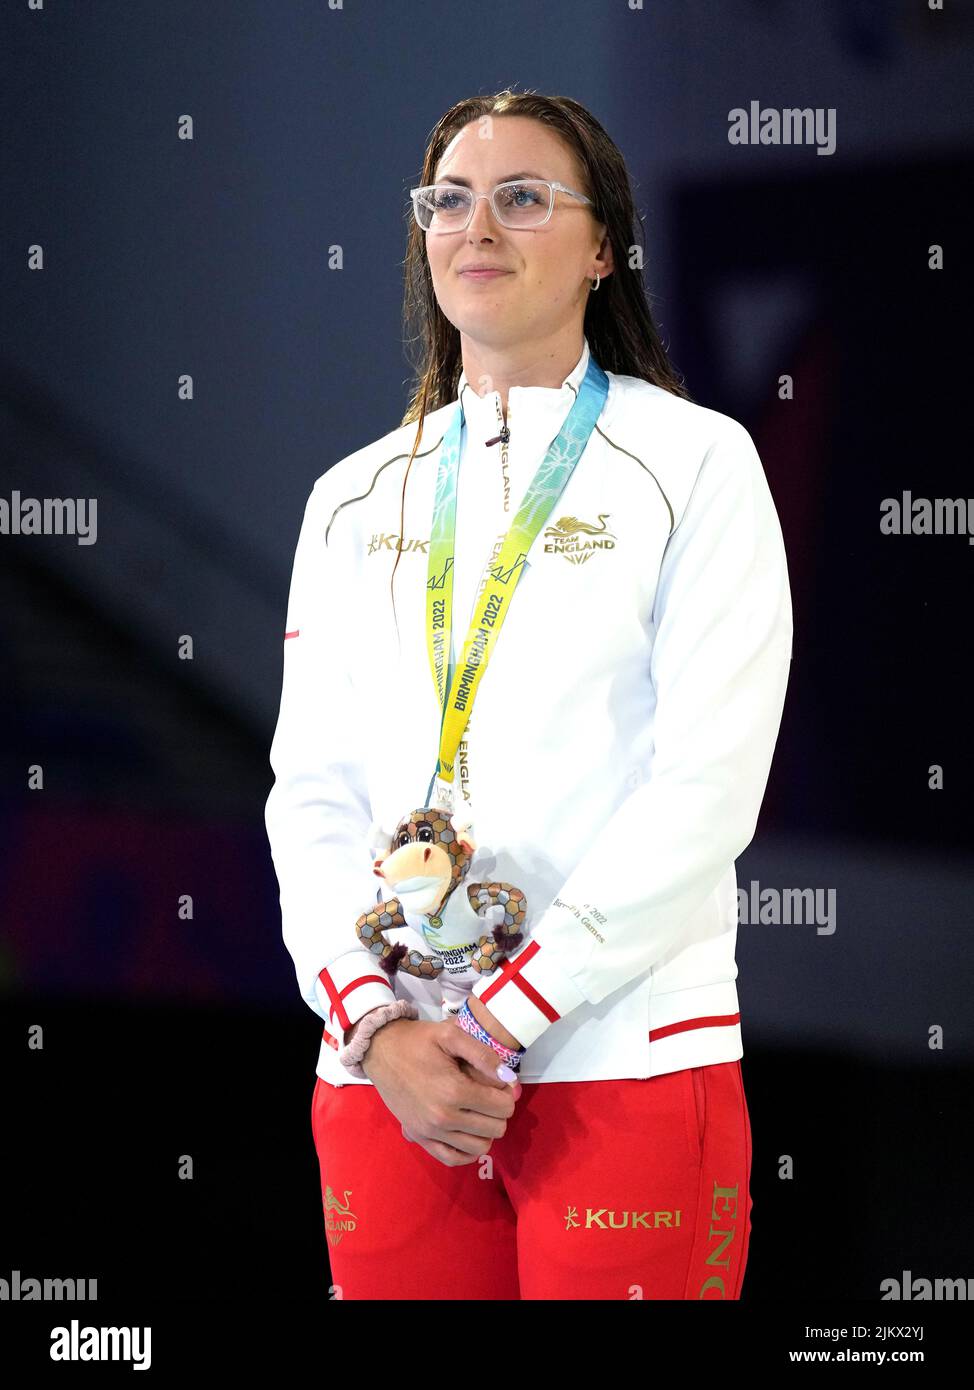 England's Jessica-Jane Applegate with the silver medal after the Women's 200m Freestyle S14 Final at the Sandwell Aquatics Centre on day six of the 2022 Commonwealth Games in Birmingham. Picture date: Wednesday August 3, 2022. Stock Photo